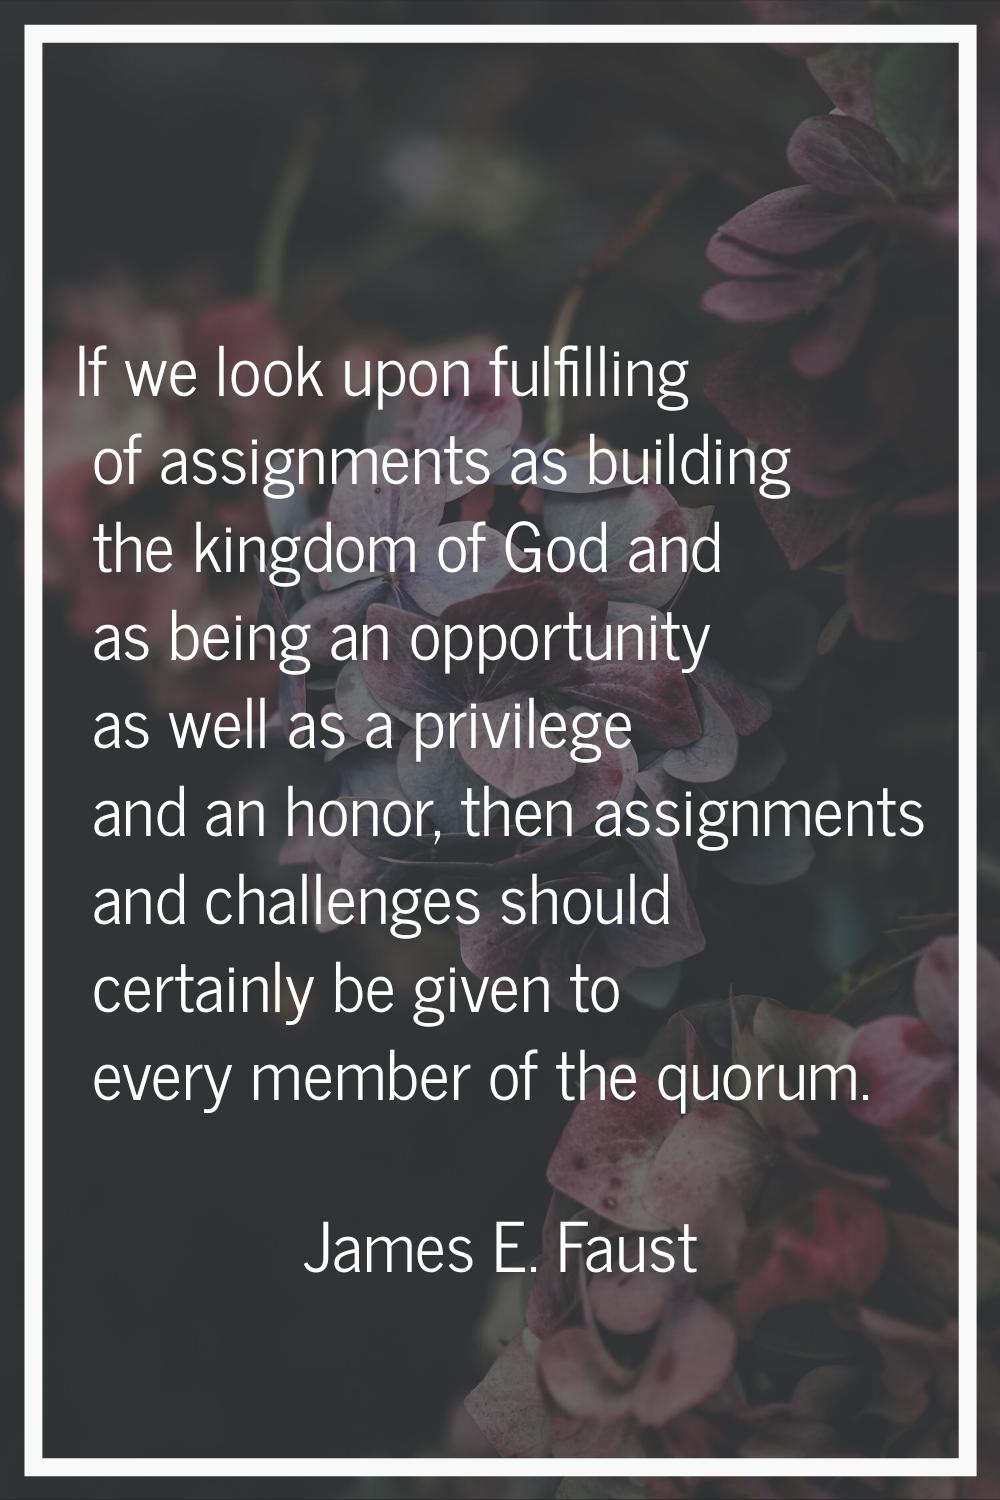 If we look upon fulfilling of assignments as building the kingdom of God and as being an opportunit